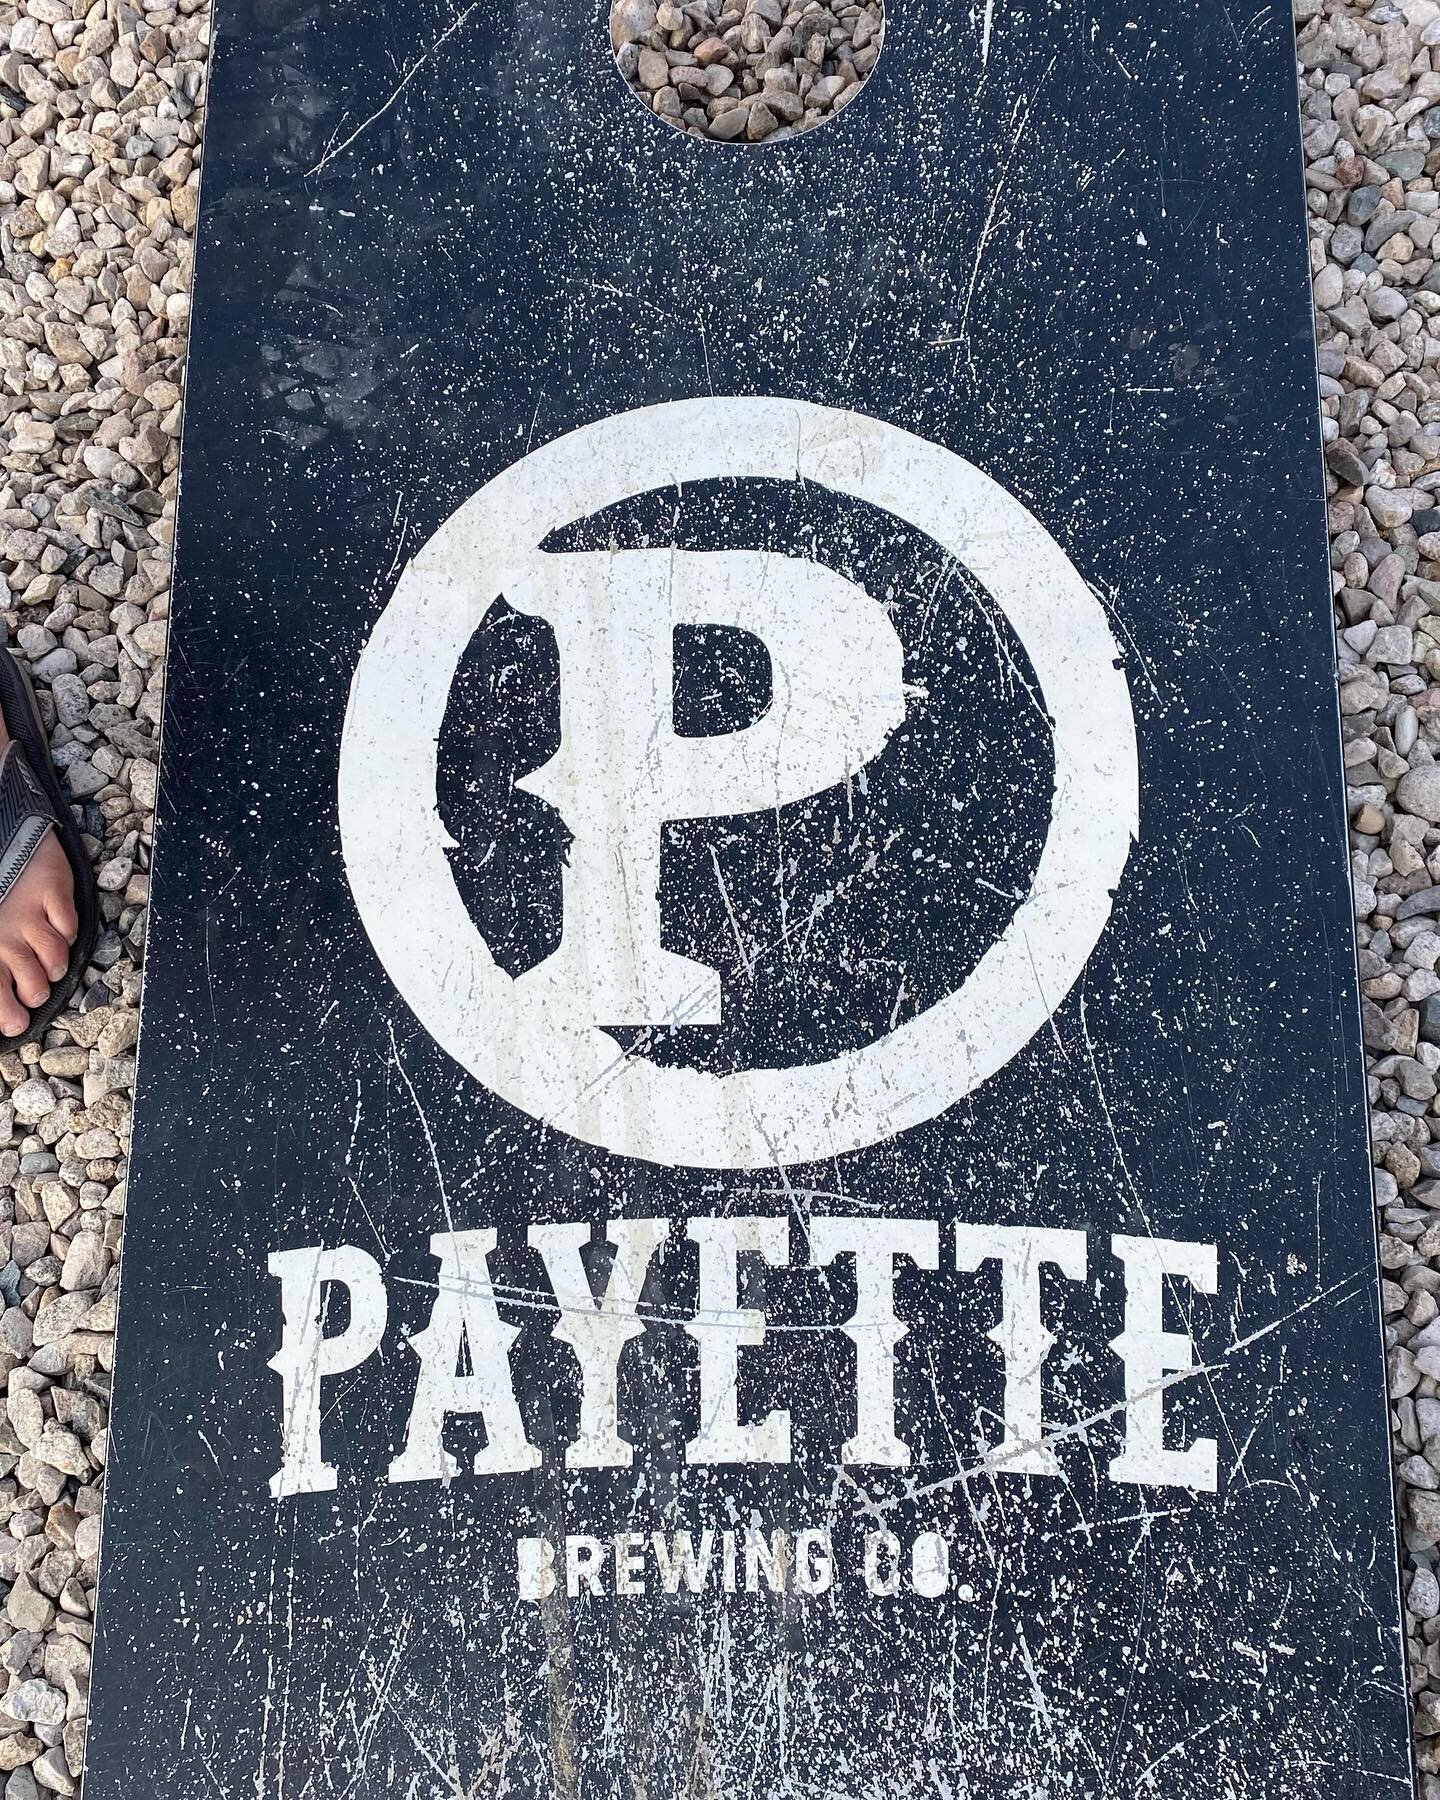 Sometimes you should &ldquo;P&rdquo; and other times you just gotta pee. What&rsquo;s your Friday status? @payettebrewing released a limited series brew yesterday called Trout Hero IPA which is available in cans to take on your next adventure or on t